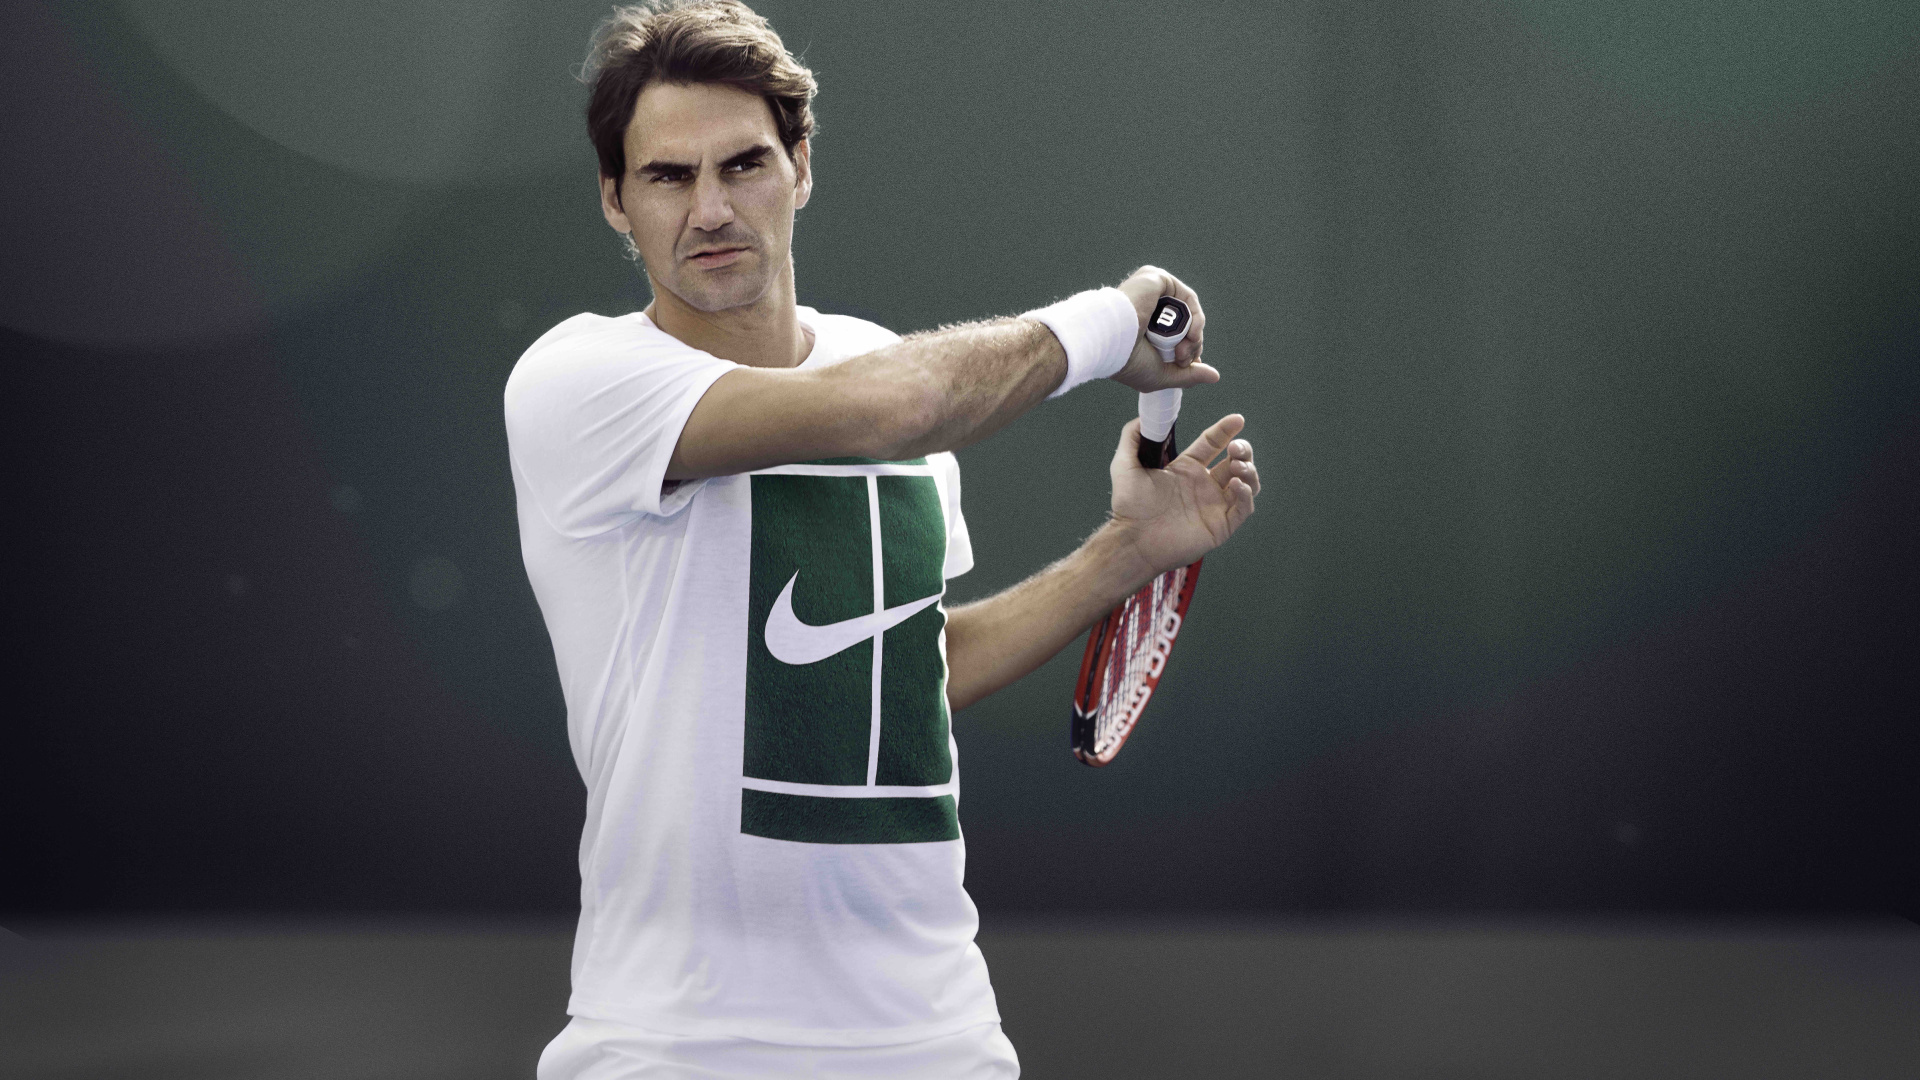 Man in Green and White Nike Jersey Shirt Holding Red and White Tennis Racket. Wallpaper in 1920x1080 Resolution